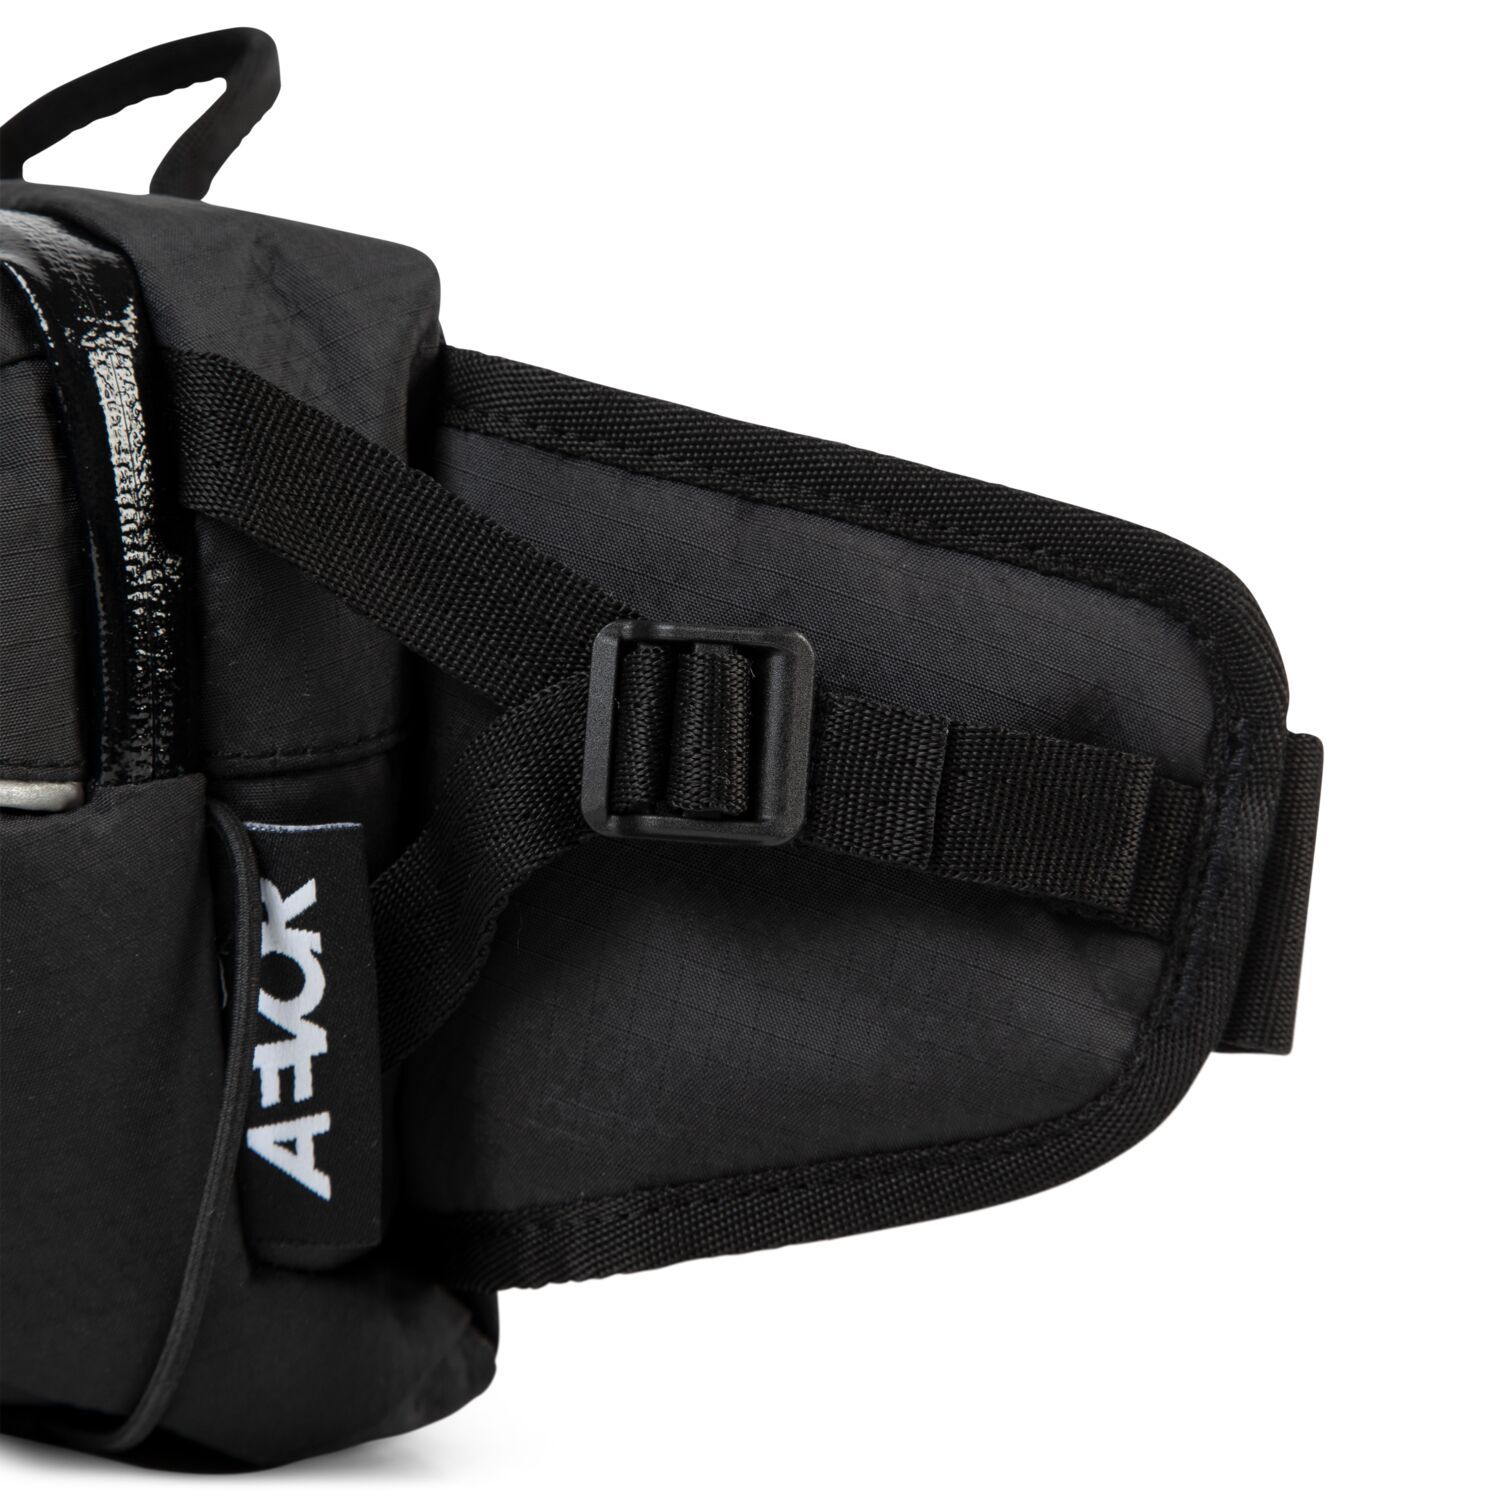 Aevor Bar Bag Proof - Made from 100 % Recycled PET Black Bags